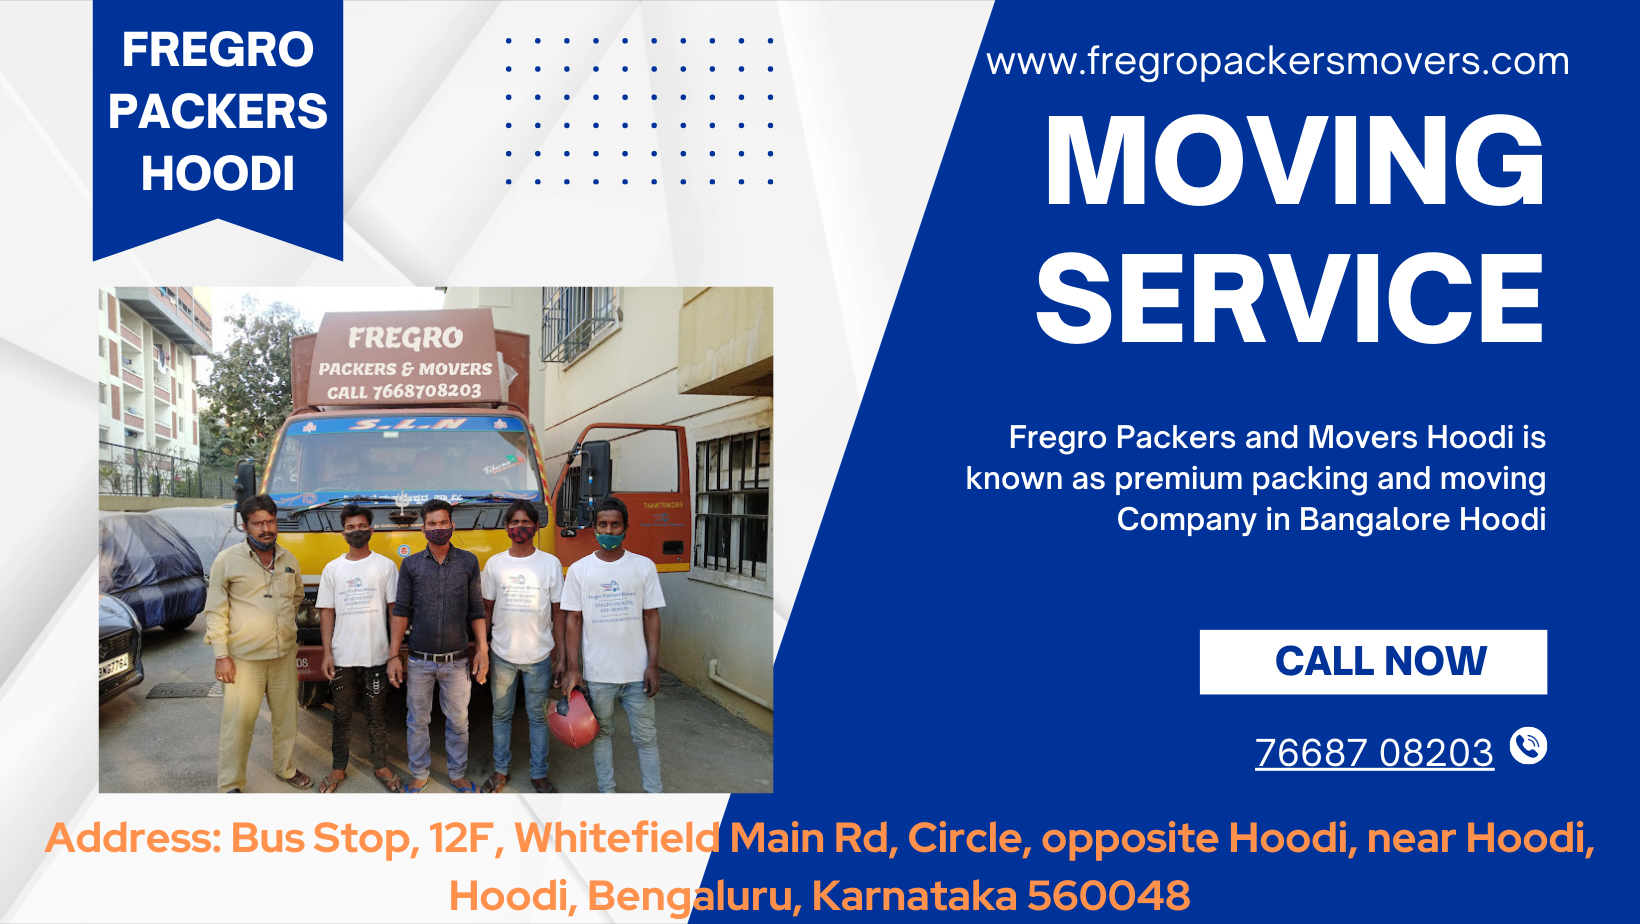 Fregro Packers and Movers hoodi